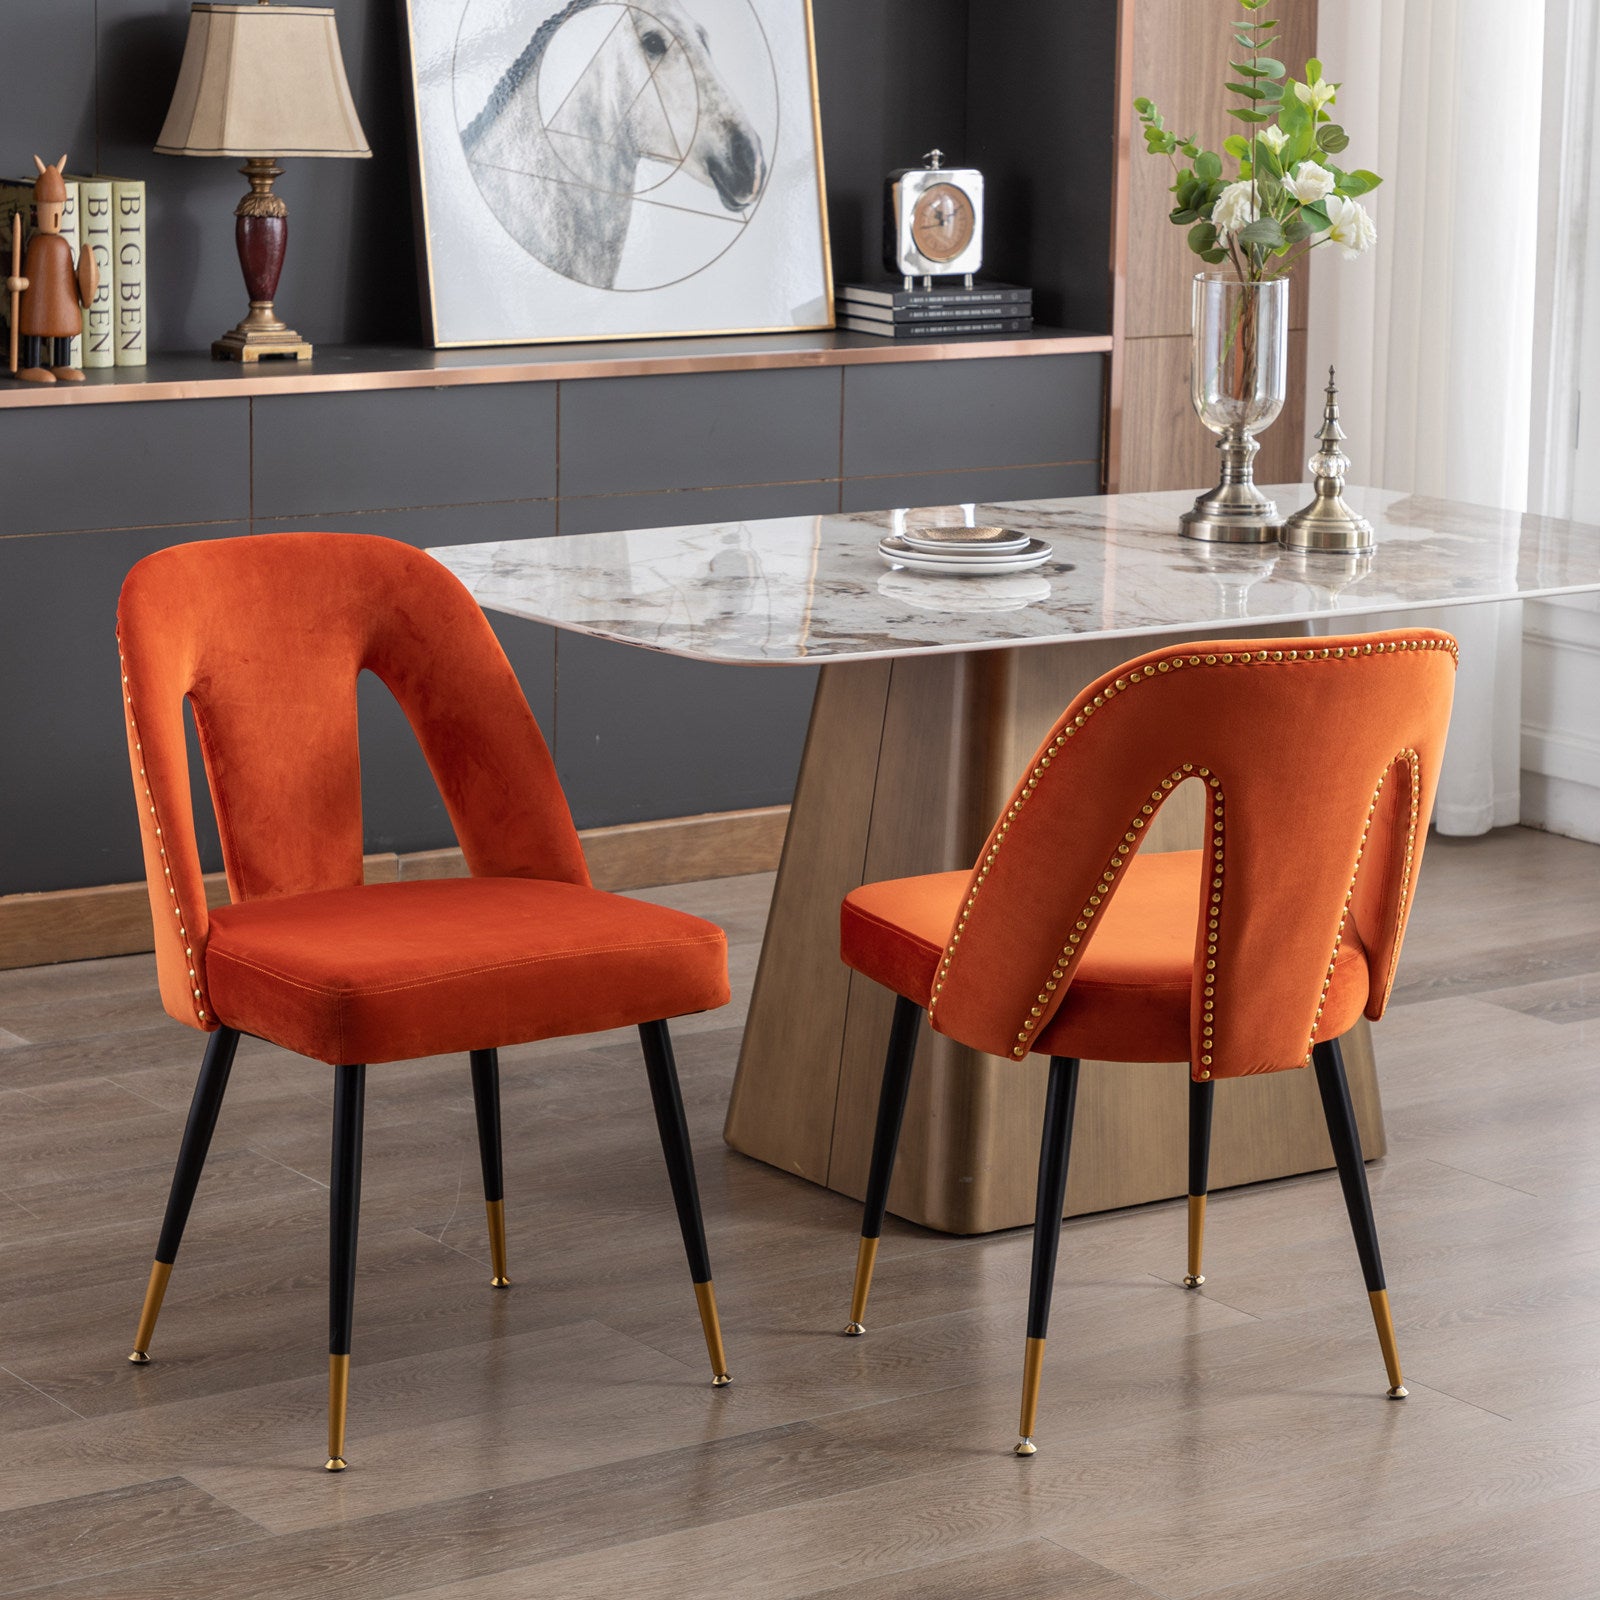 Velvet Upholstered Dining Chairs with Nailheads and Gold Tipped Black Metal Legs, Orange, Set of 2, A&A Furniture, Akoya Collection